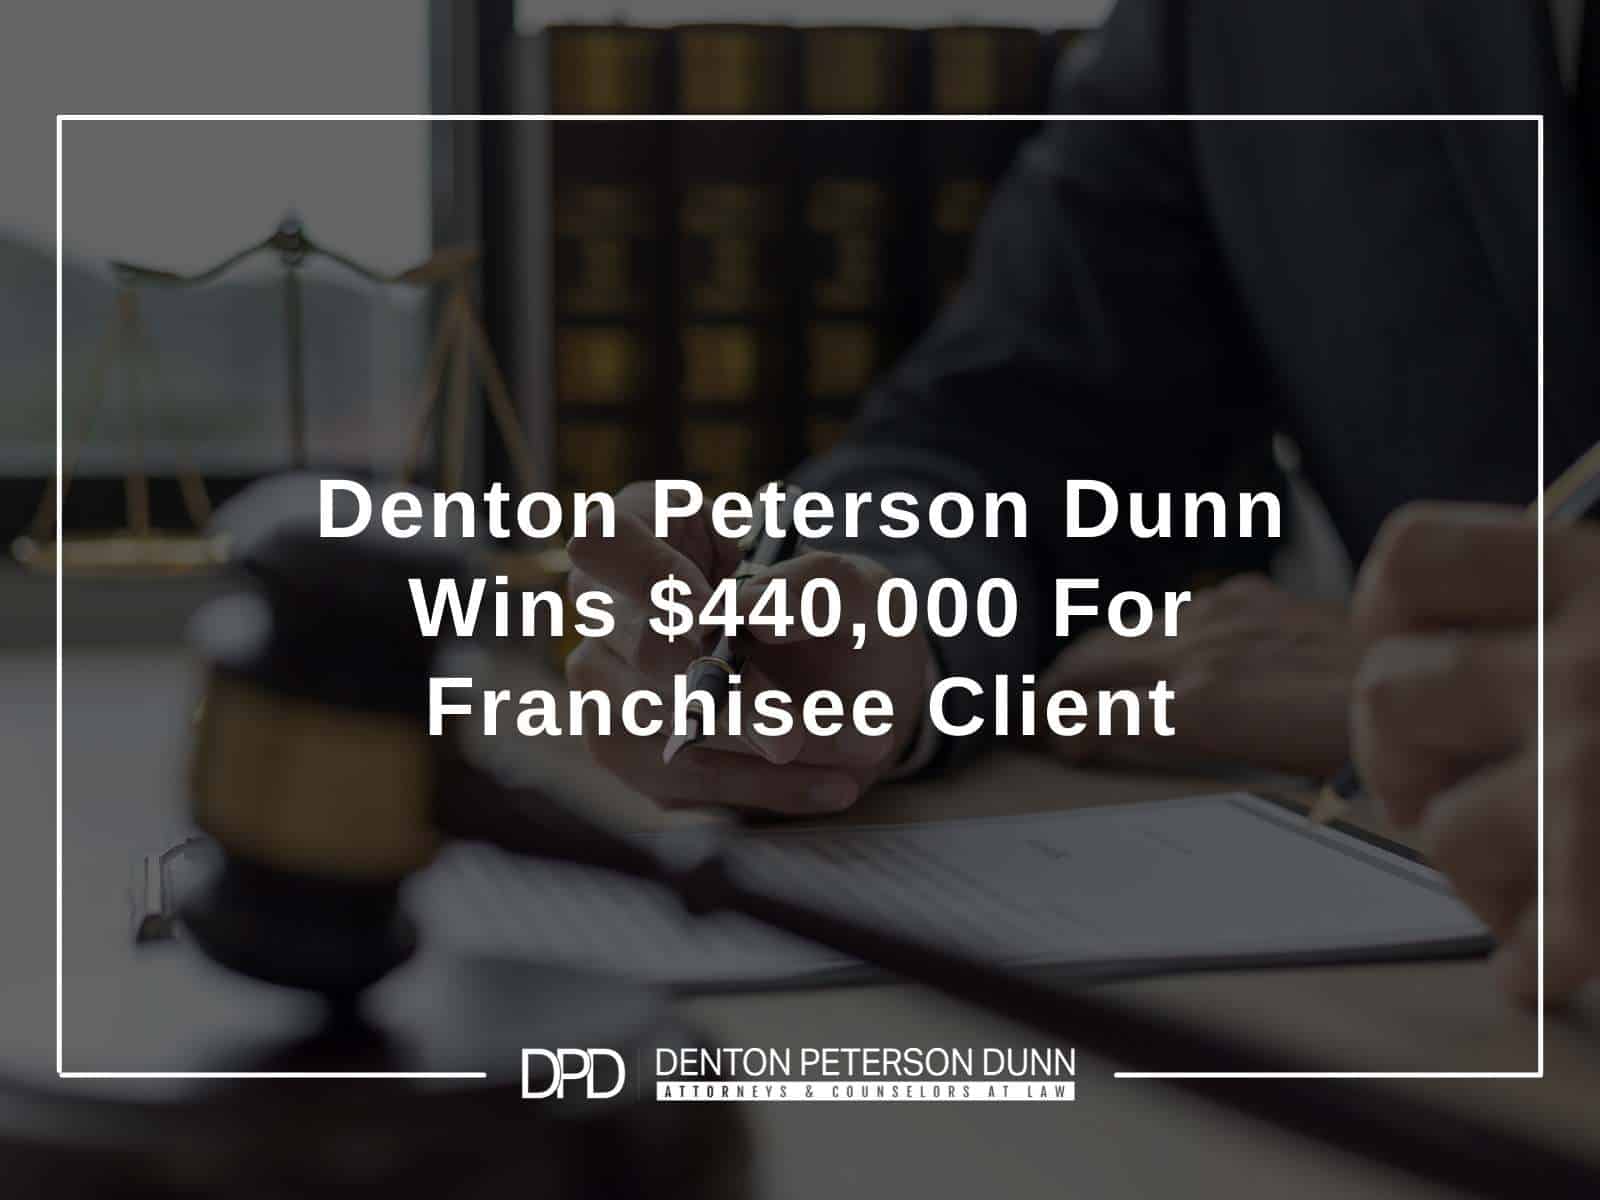 Denton Peterson Dunn Wins $440,000 For Franchisee Client